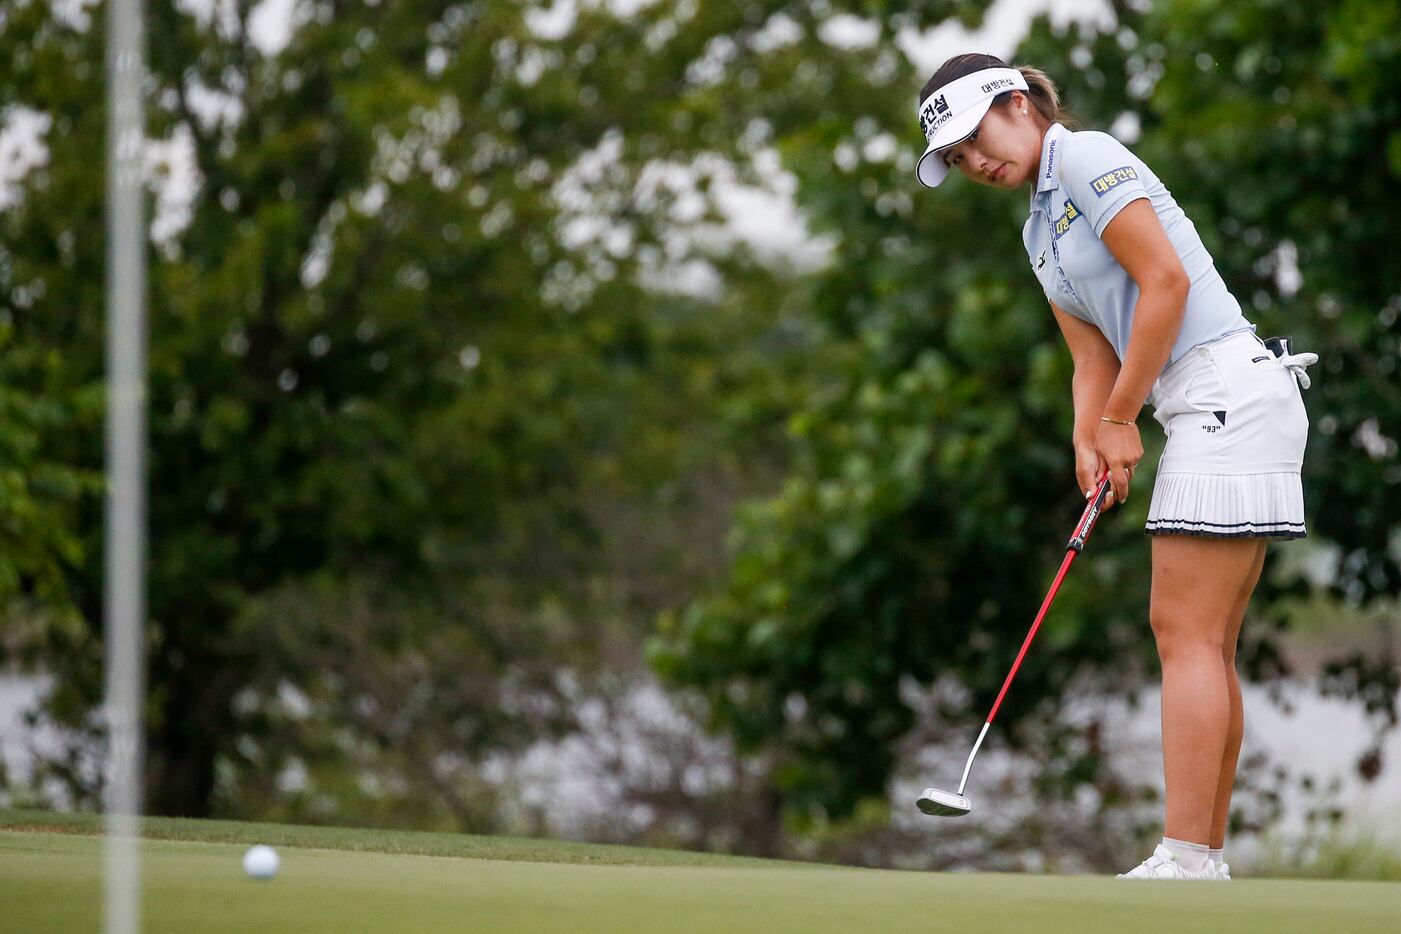 Professional golfer Jeongeun Lee6 putts a ball on the No. 12 green during the third round of...